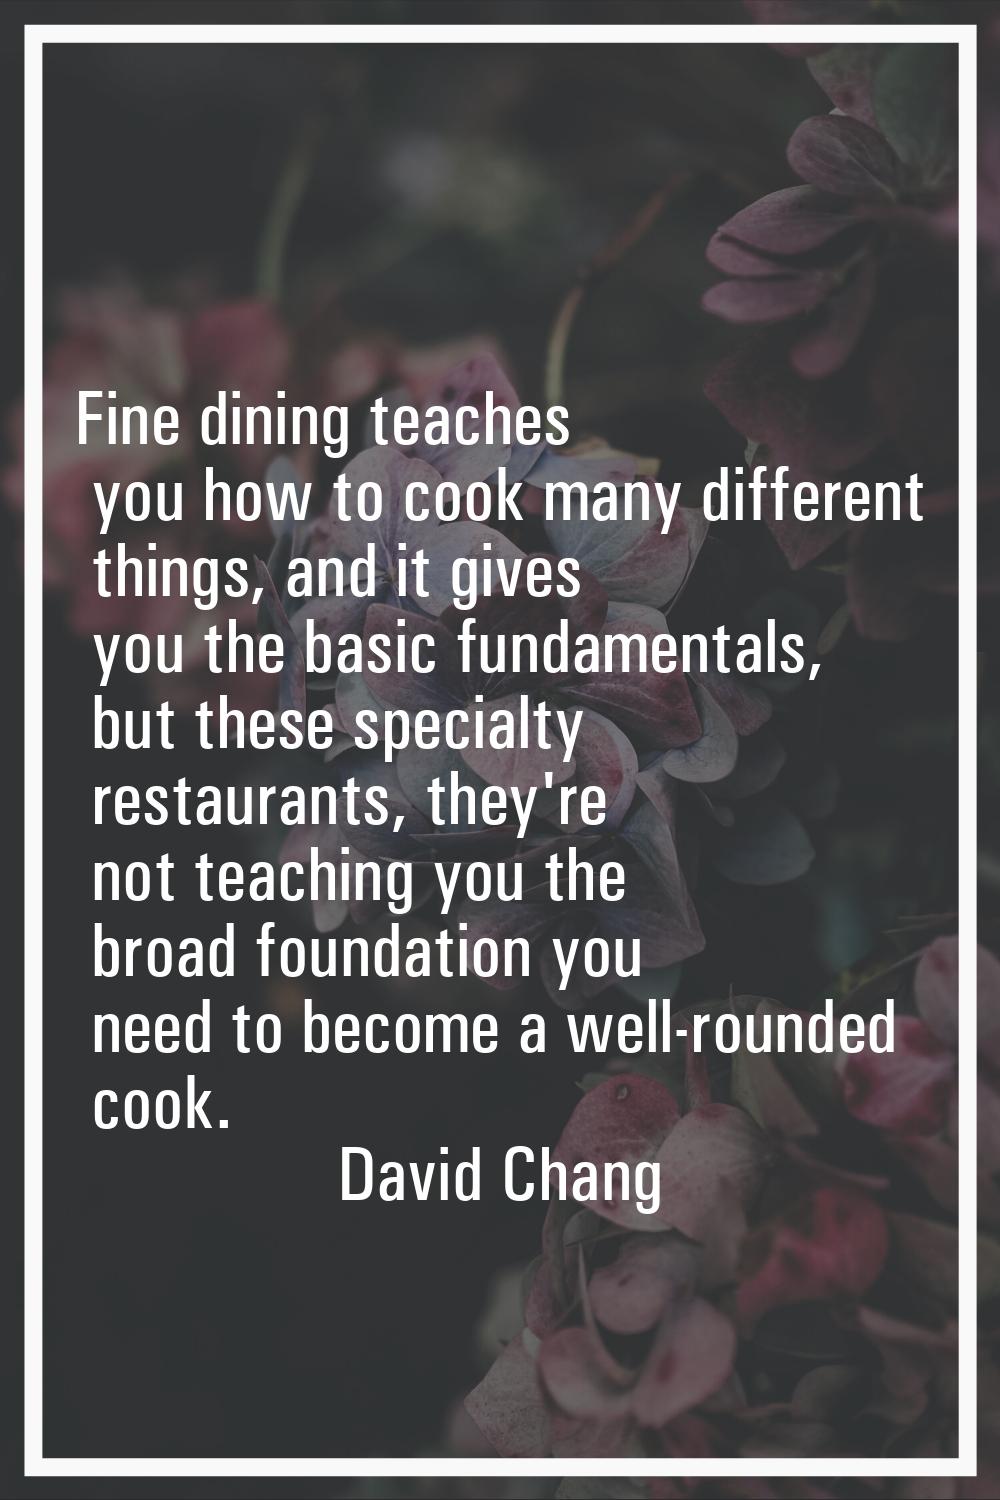 Fine dining teaches you how to cook many different things, and it gives you the basic fundamentals,